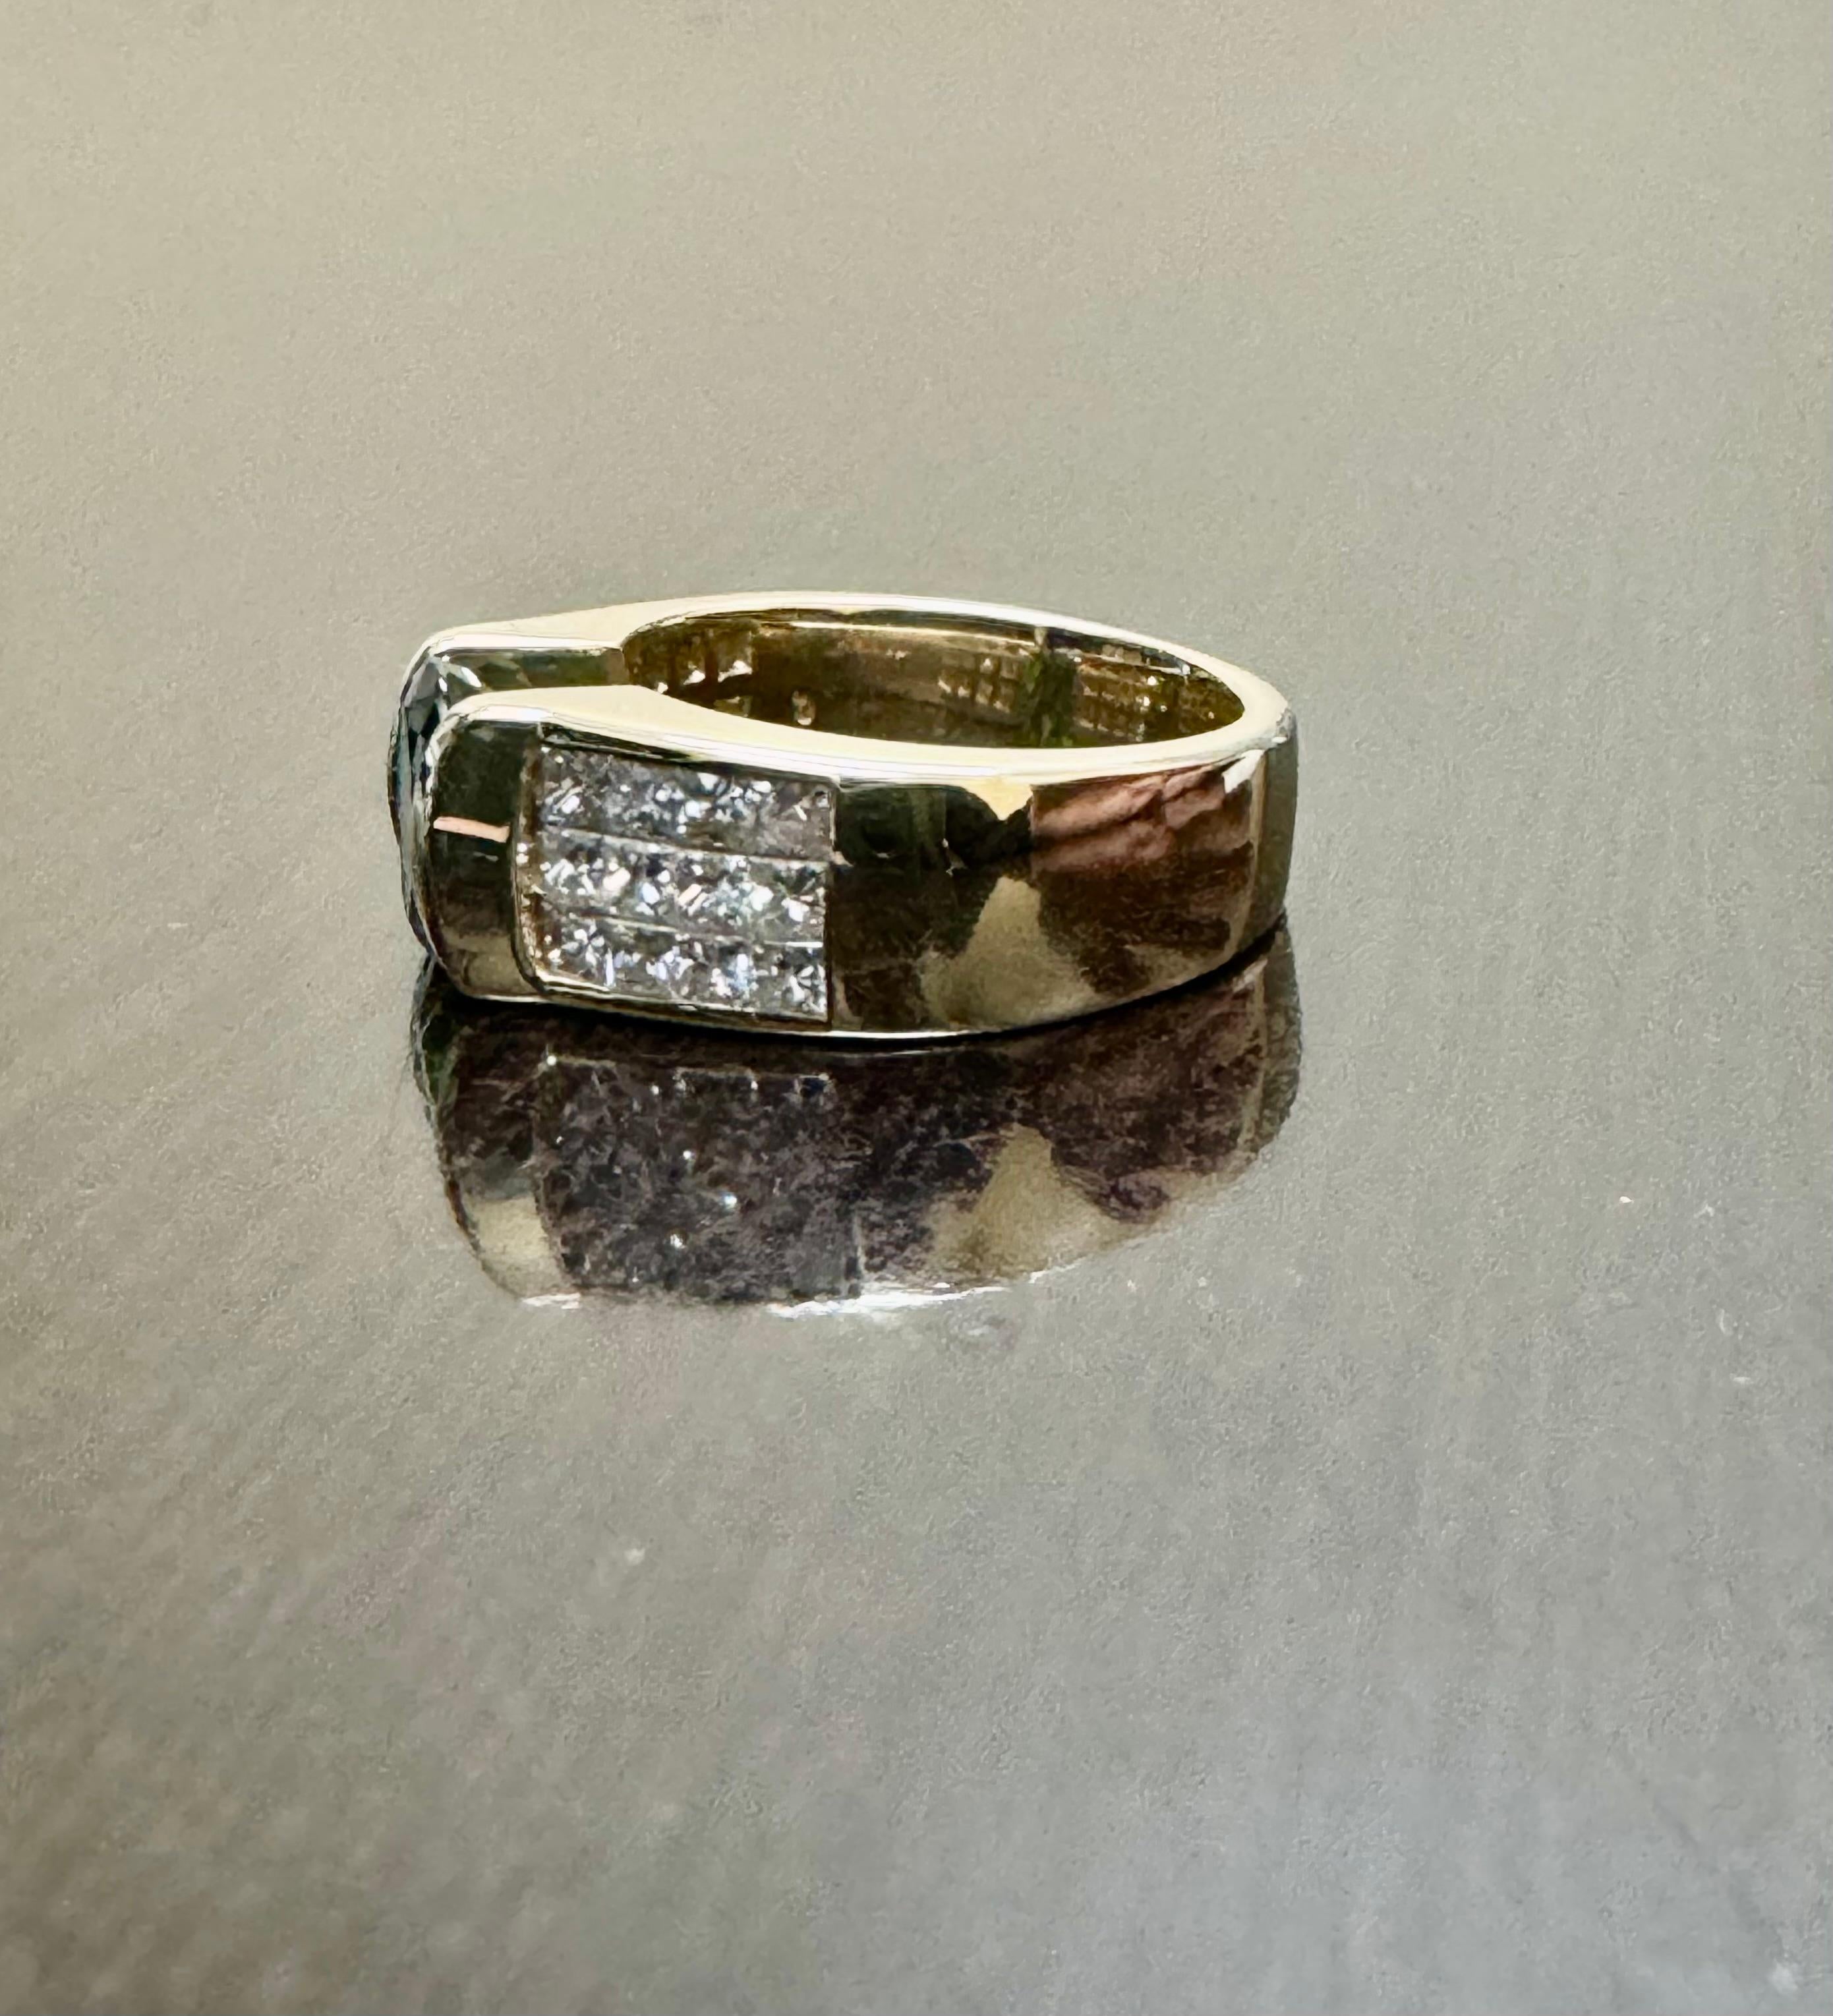 14K Yellow Gold Princess Cut Diamond 1.62 Carat Tsavorite Garnet Engagement Ring In New Condition For Sale In Los Angeles, CA